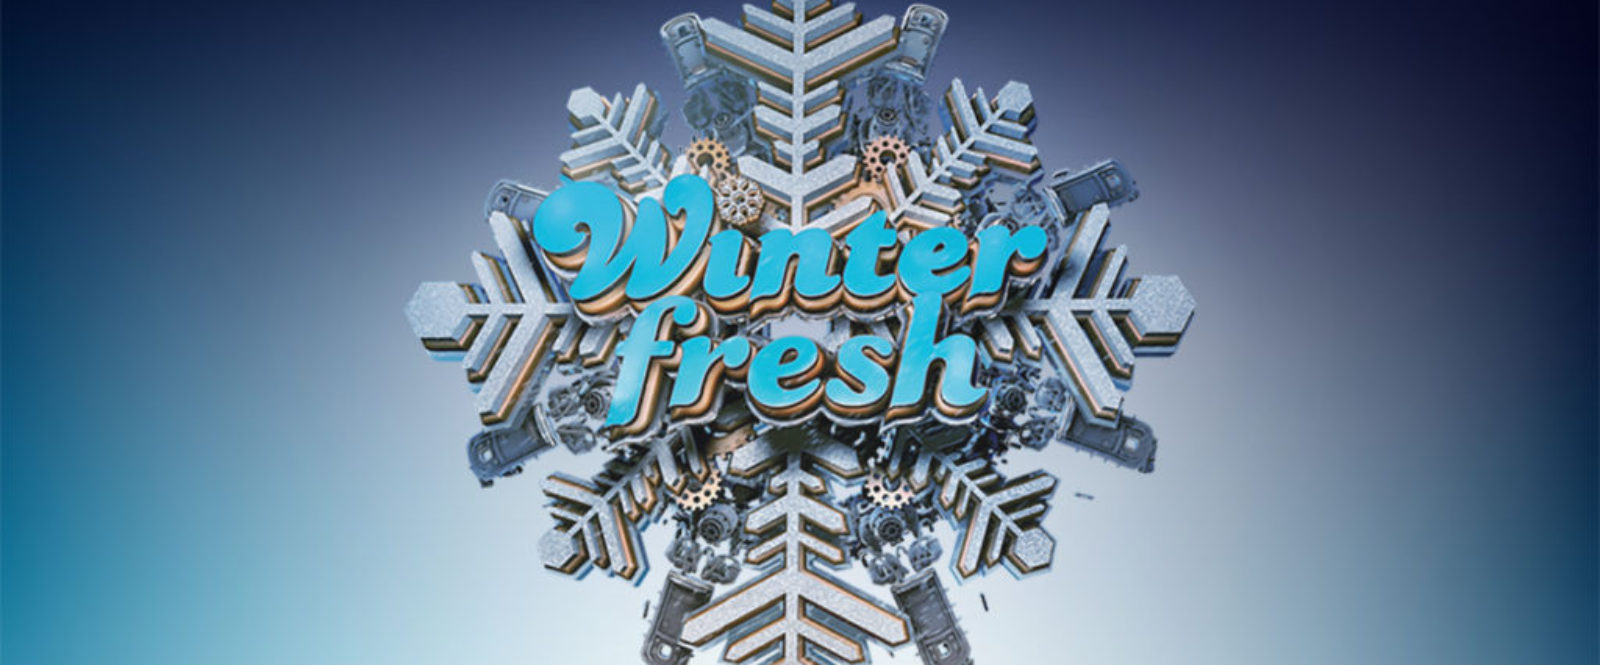 New addition to the Winterfresh Line up!